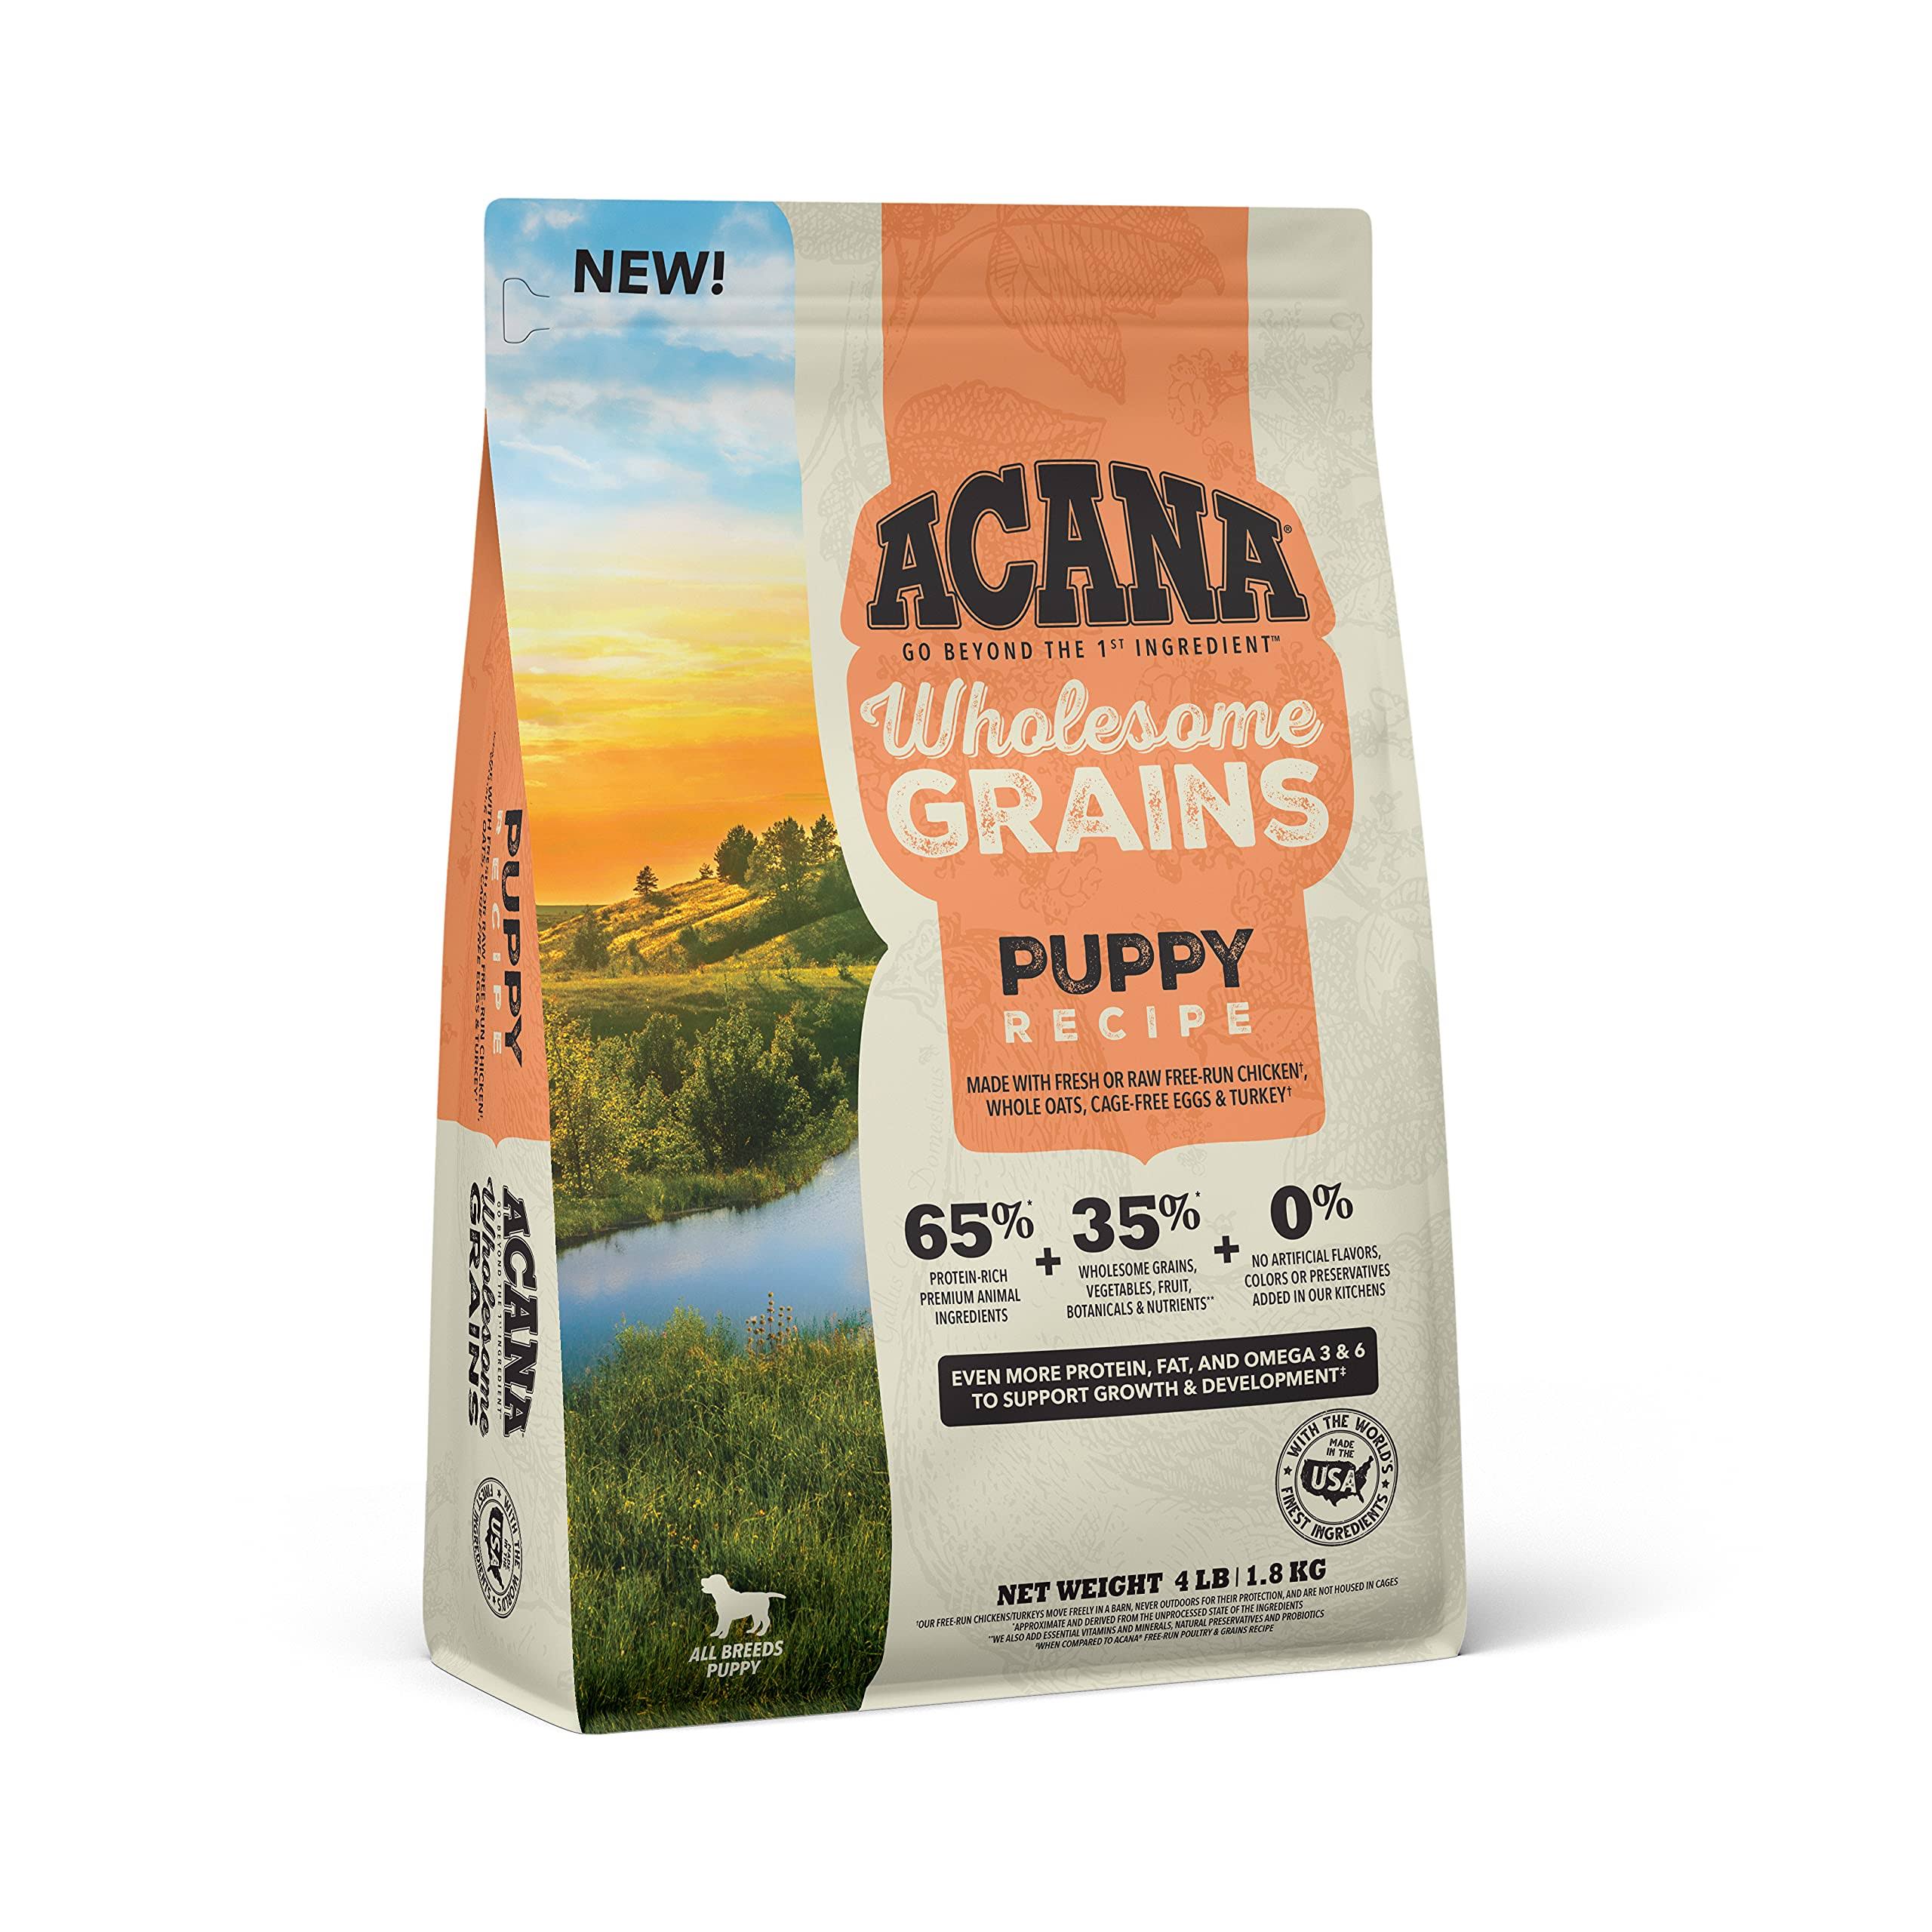 Acana Wholesome Grains Puppy Recipe, Premium High-Protein Dry Puppy Food, 4lb